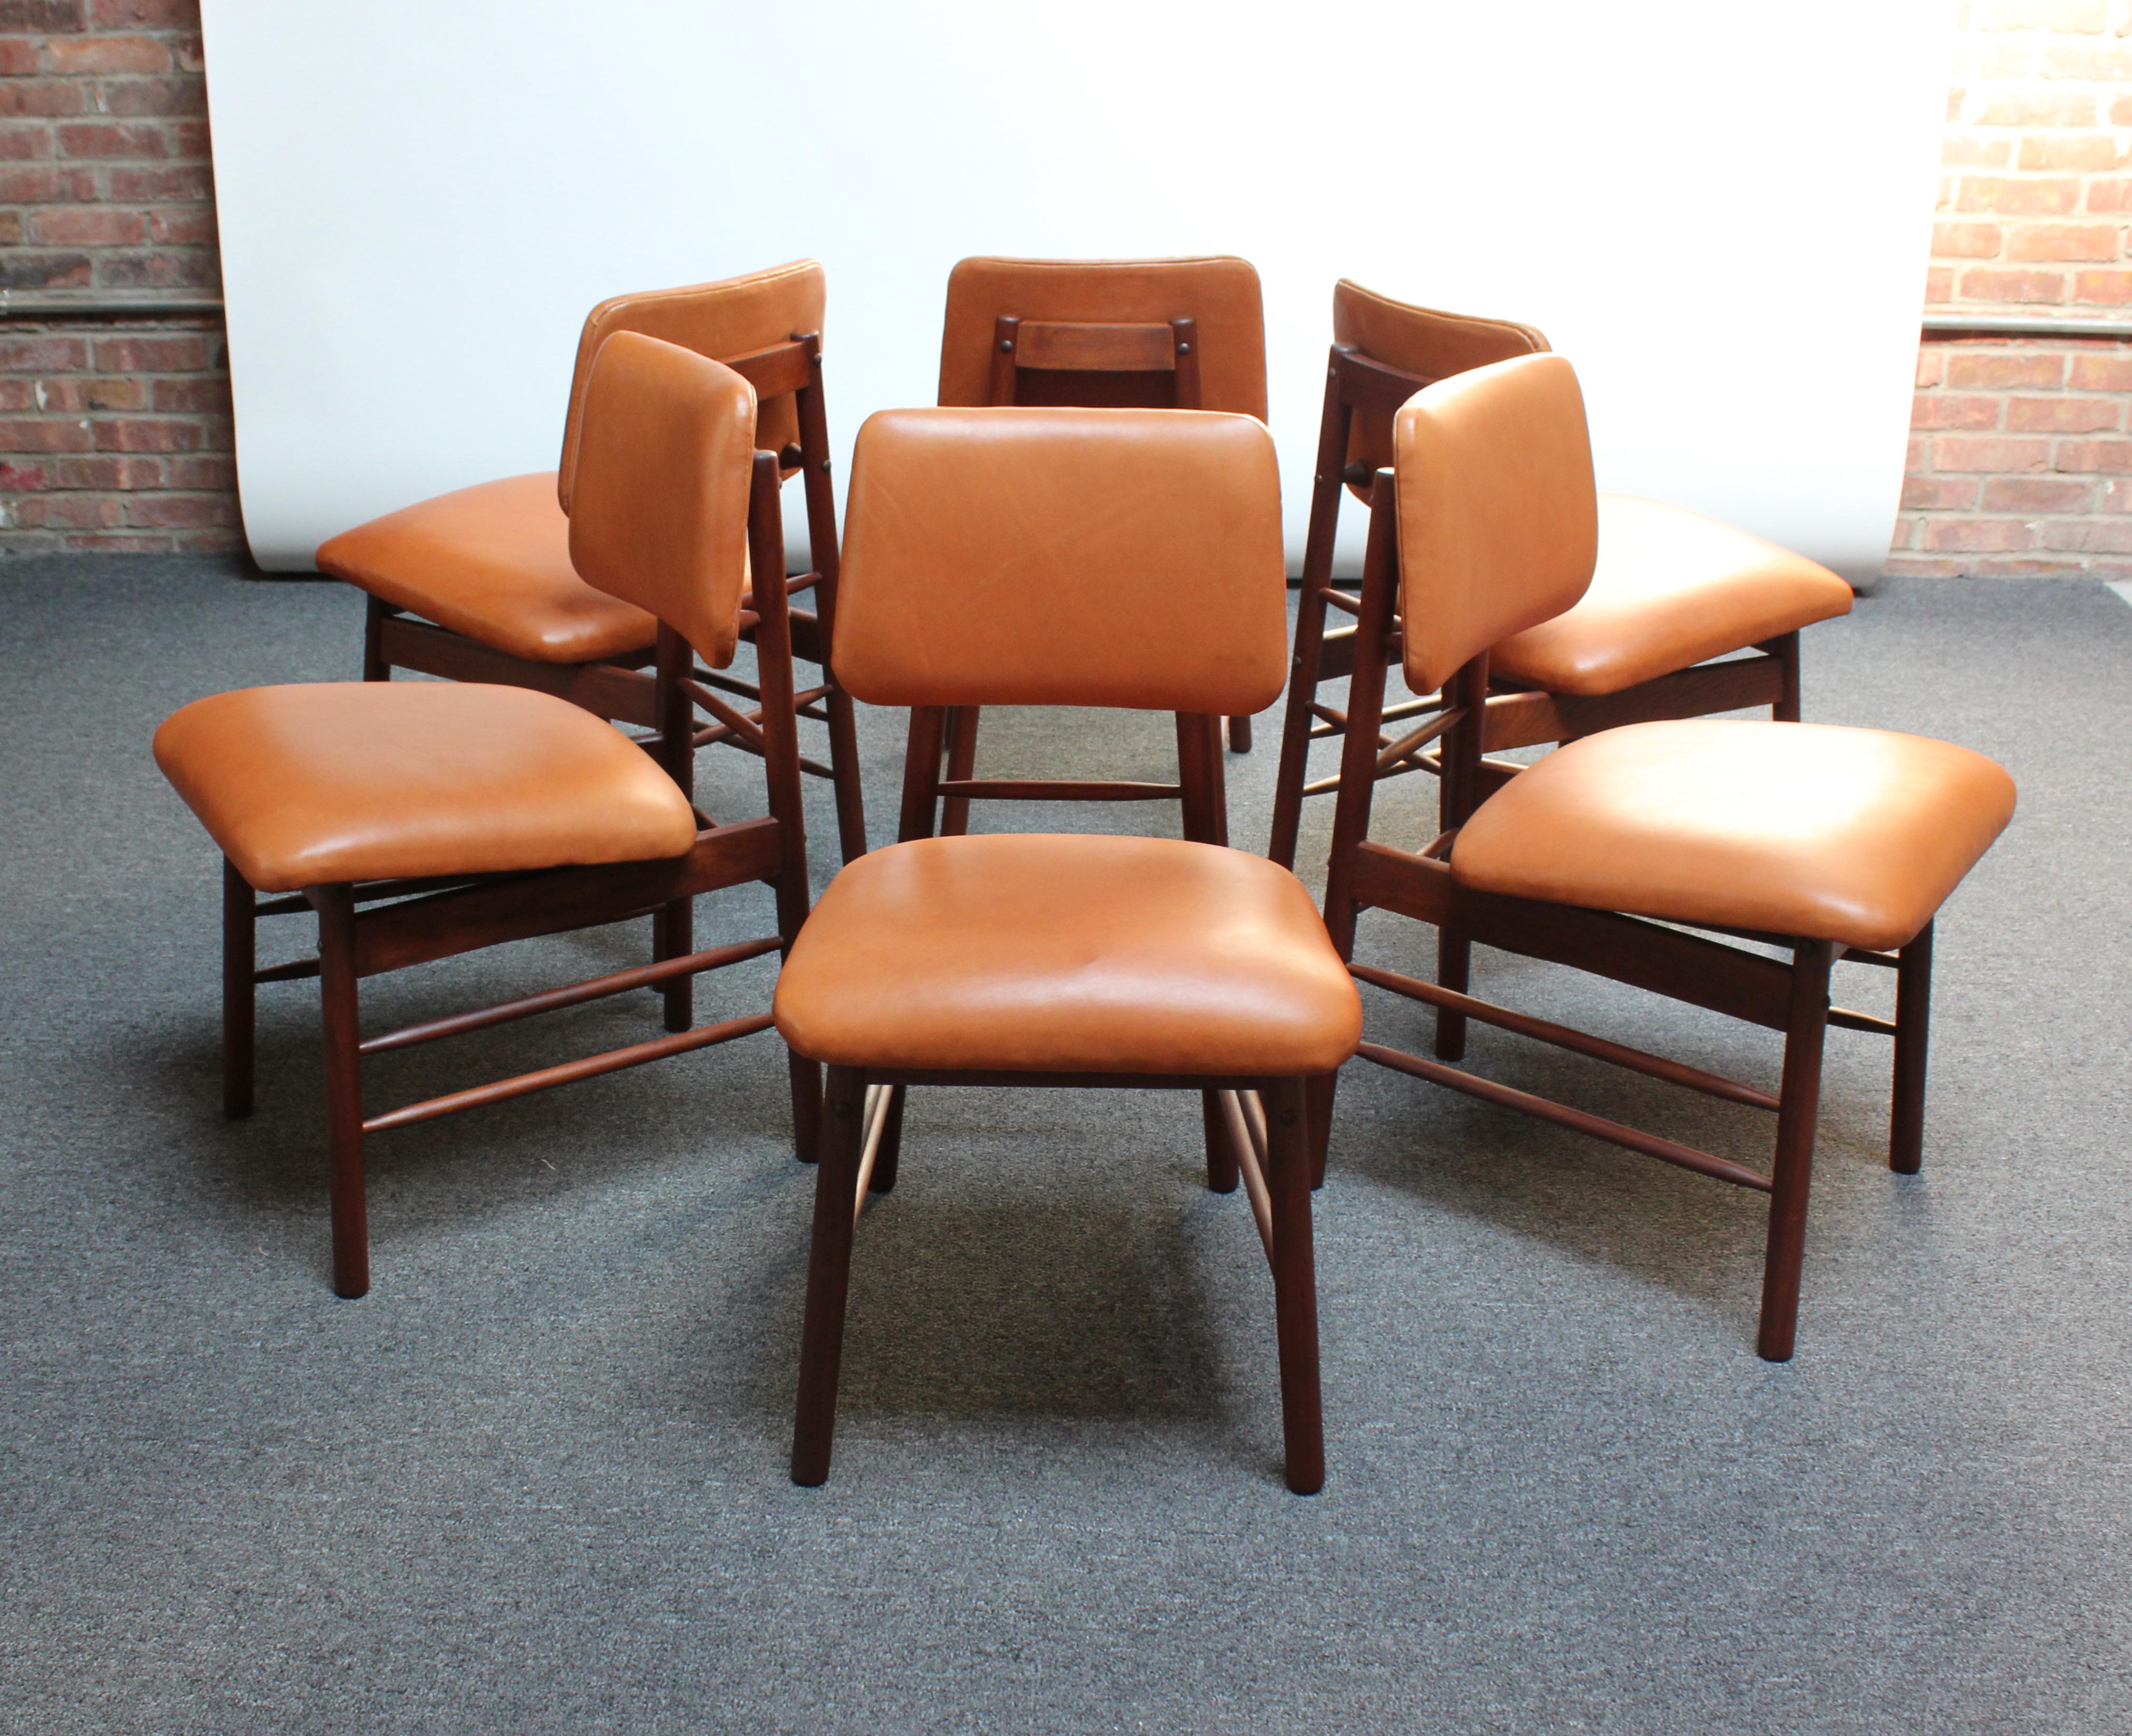 Set of six walnut dining chairs (Model no. 6260) designed in 1952 by Greta Magnusson Grossman for Glenn of California. Iconic chairs which earned the Good Design award from the Museum of Modern Art (New York).
Newly refinished and reupholstered in